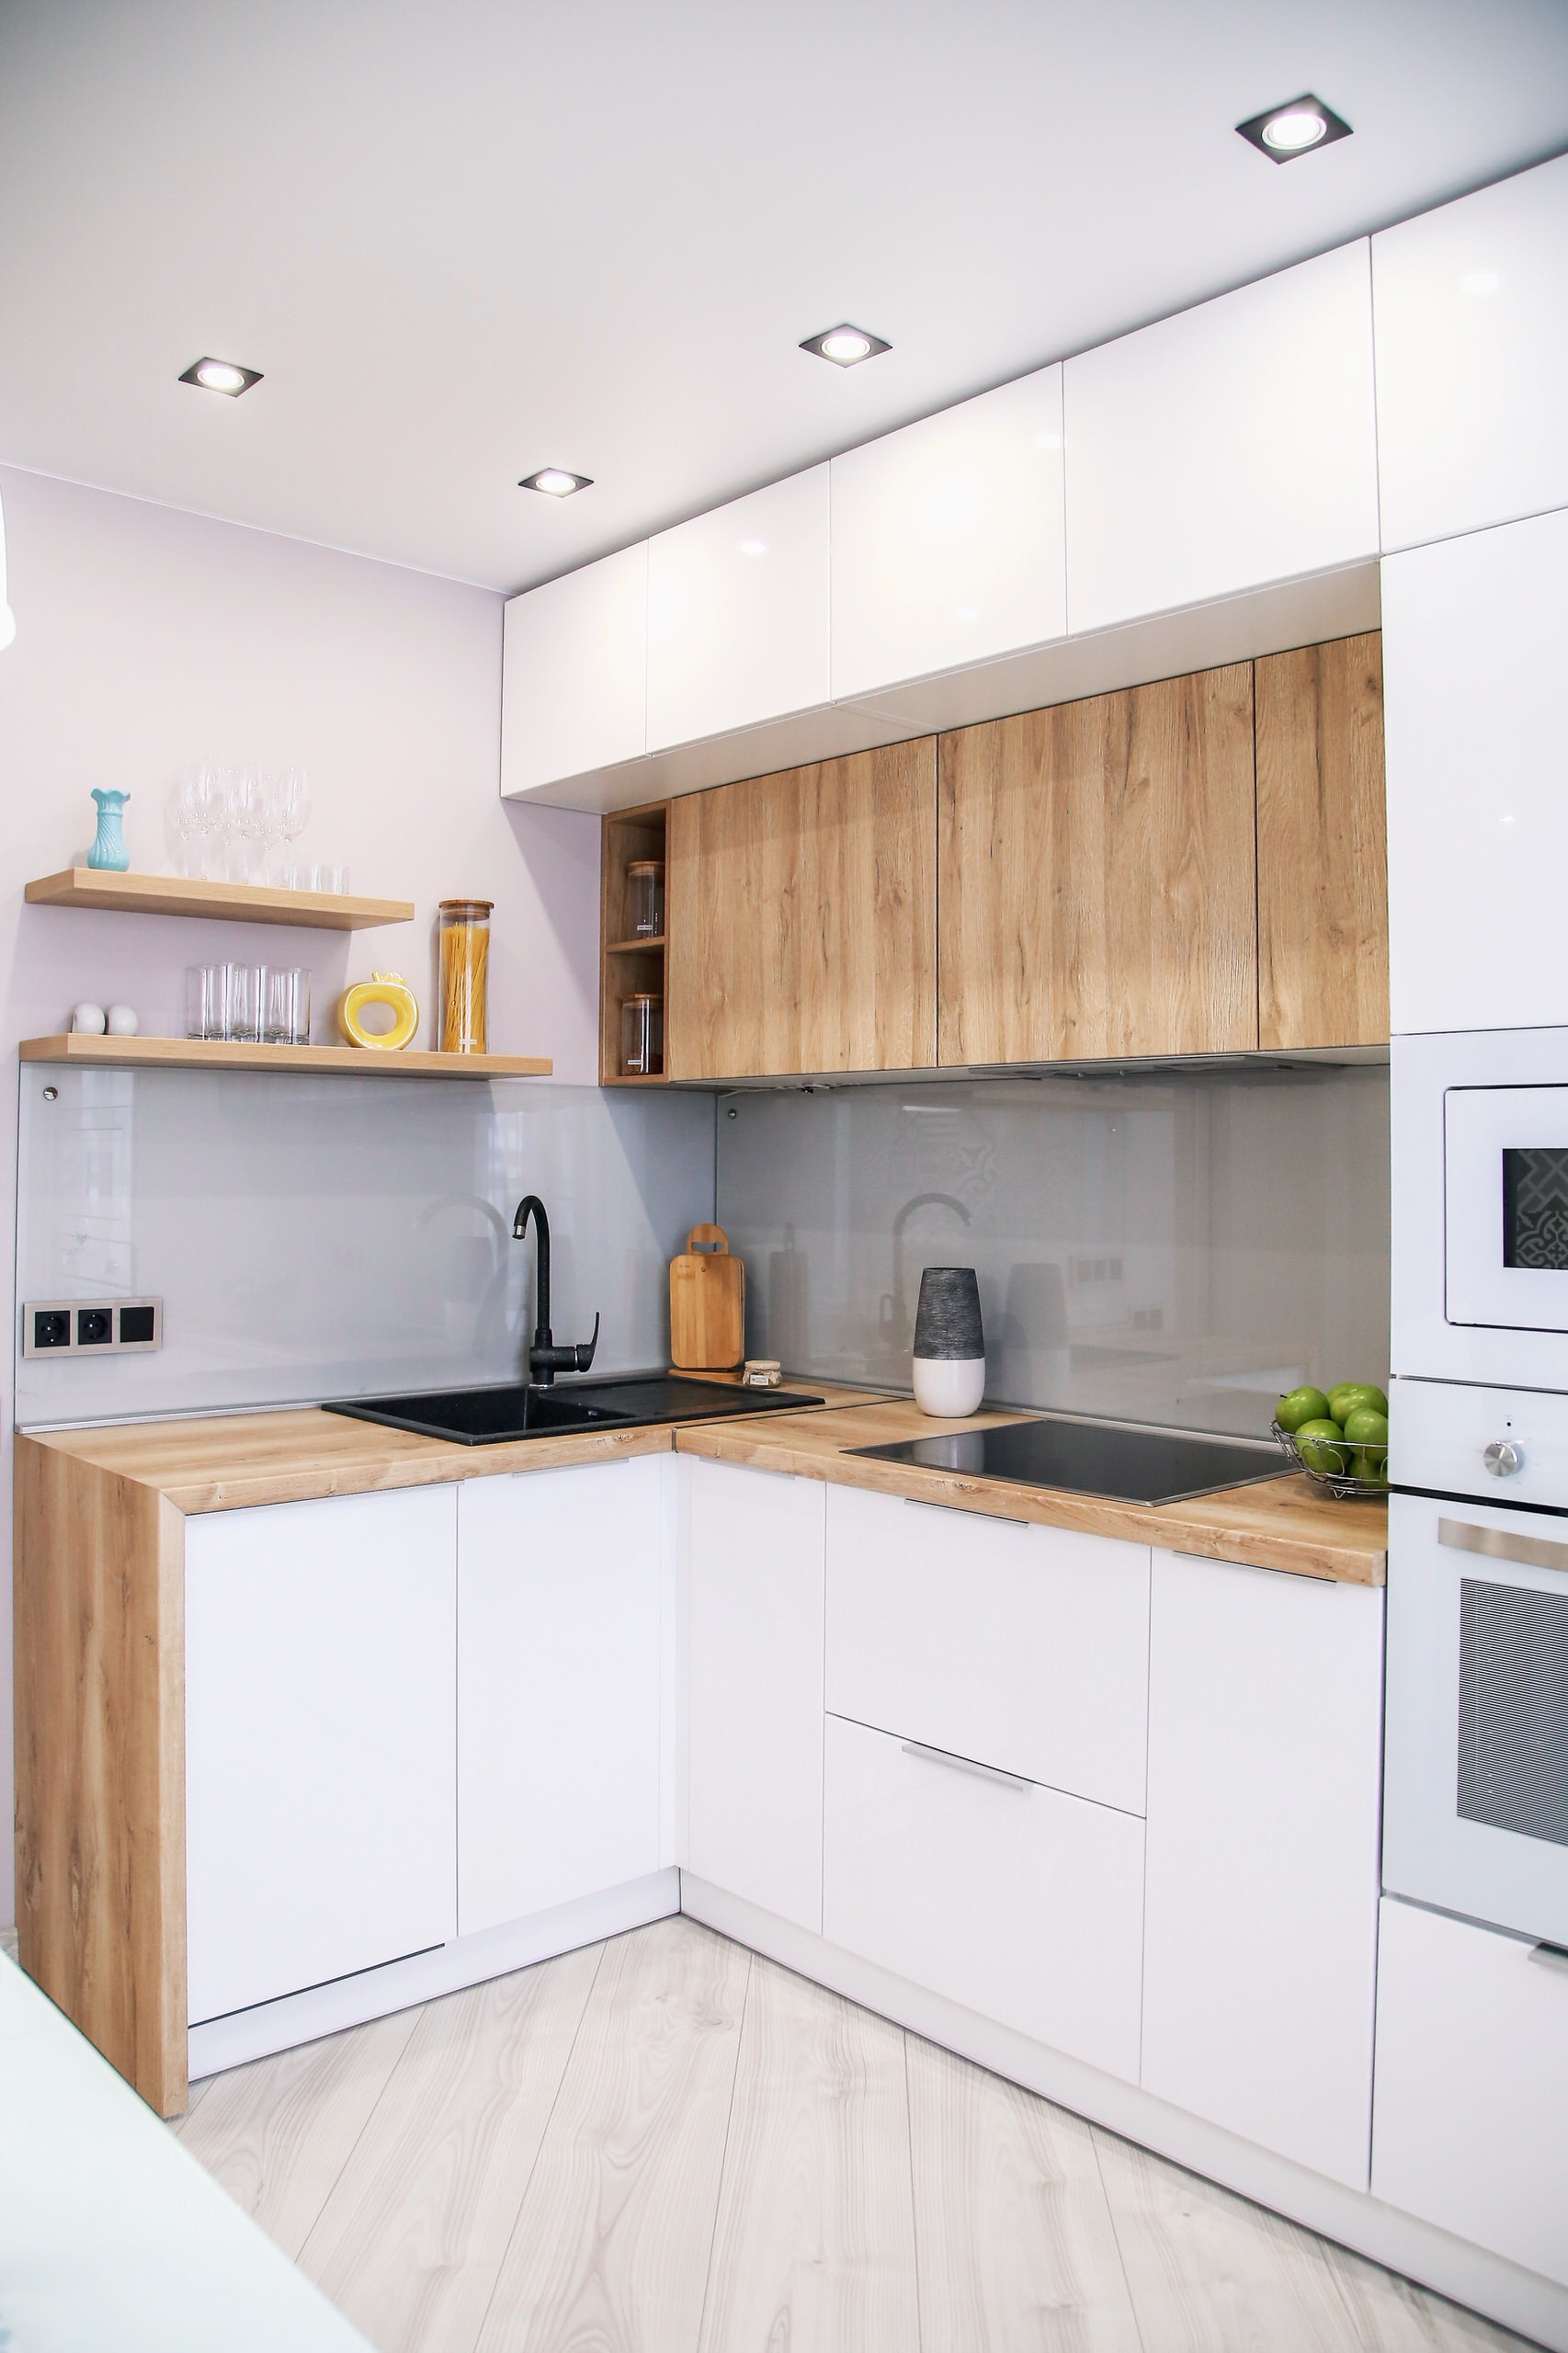 20 Small L Shaped Kitchen Ideas You'll Love   August, 20   Houzz